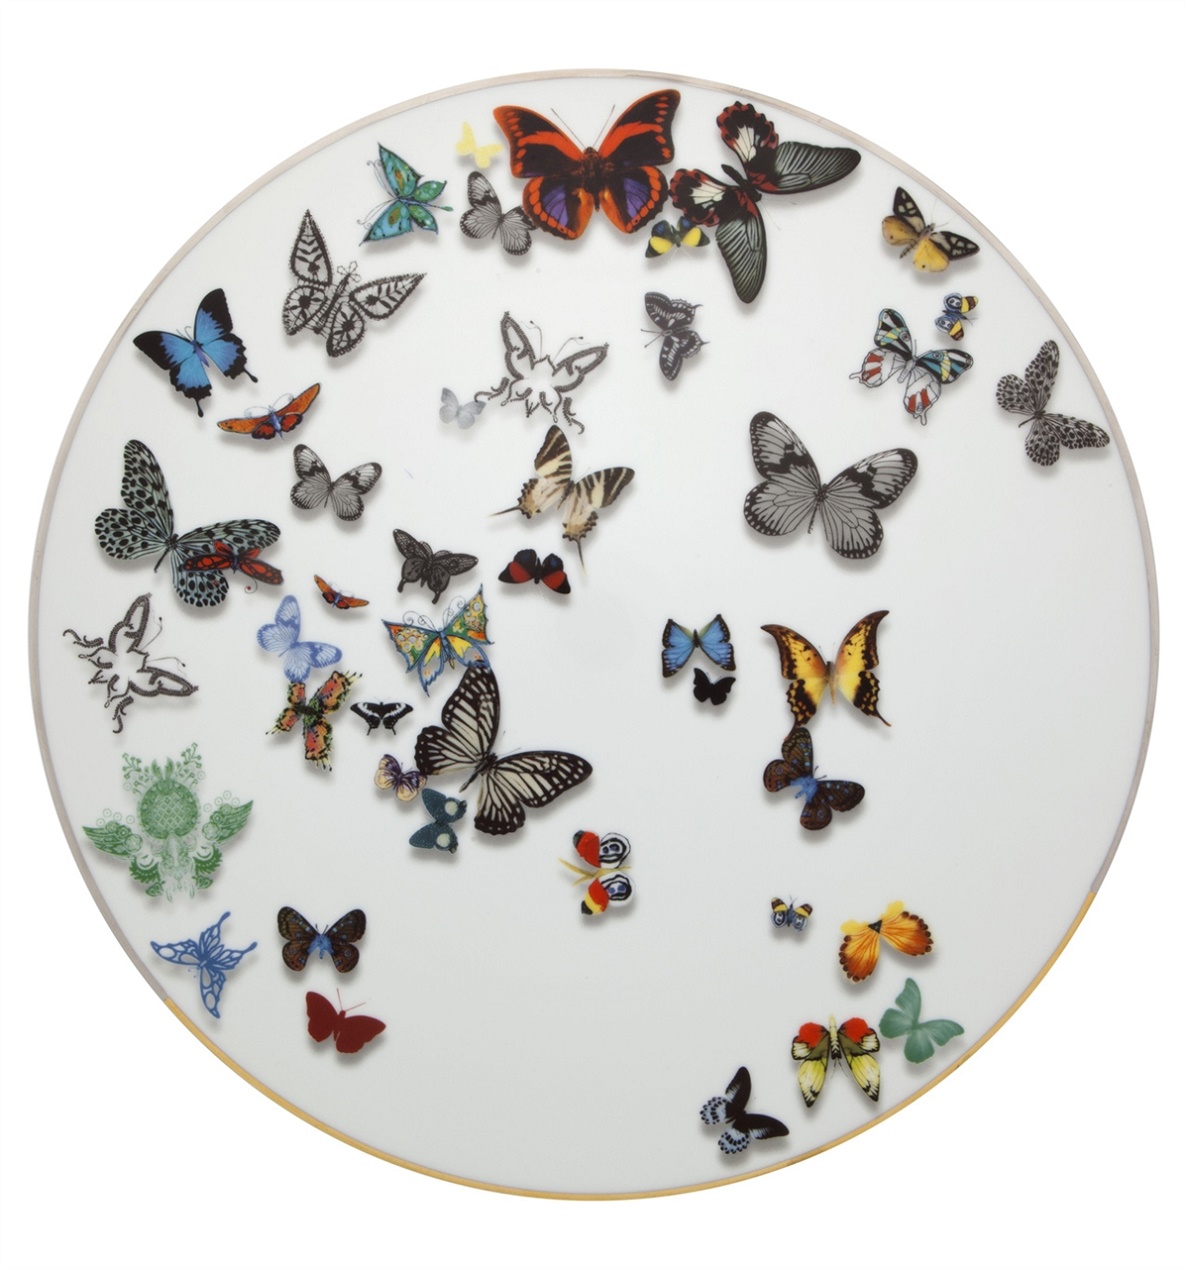 Vista Alegre Collection Butterfly charger plate by Christian Lacroix